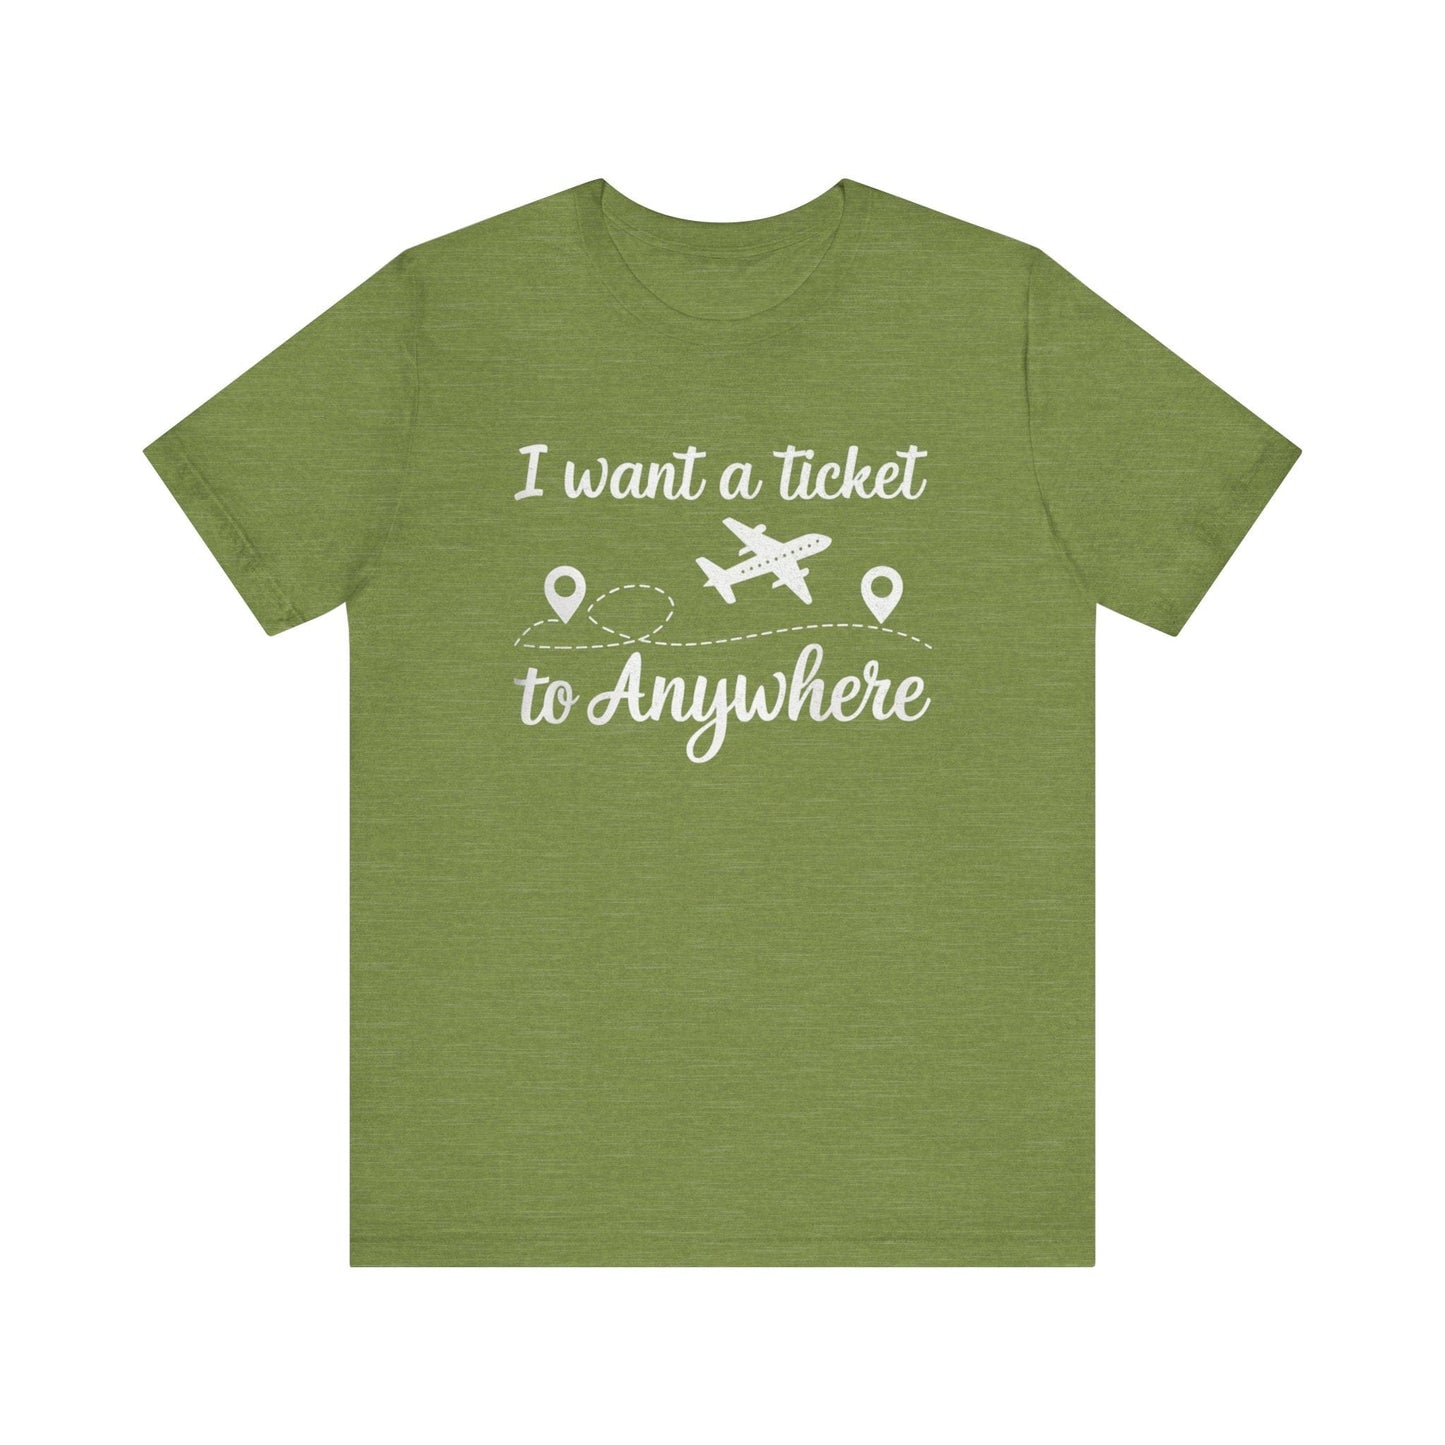 Ticket to Anywhere